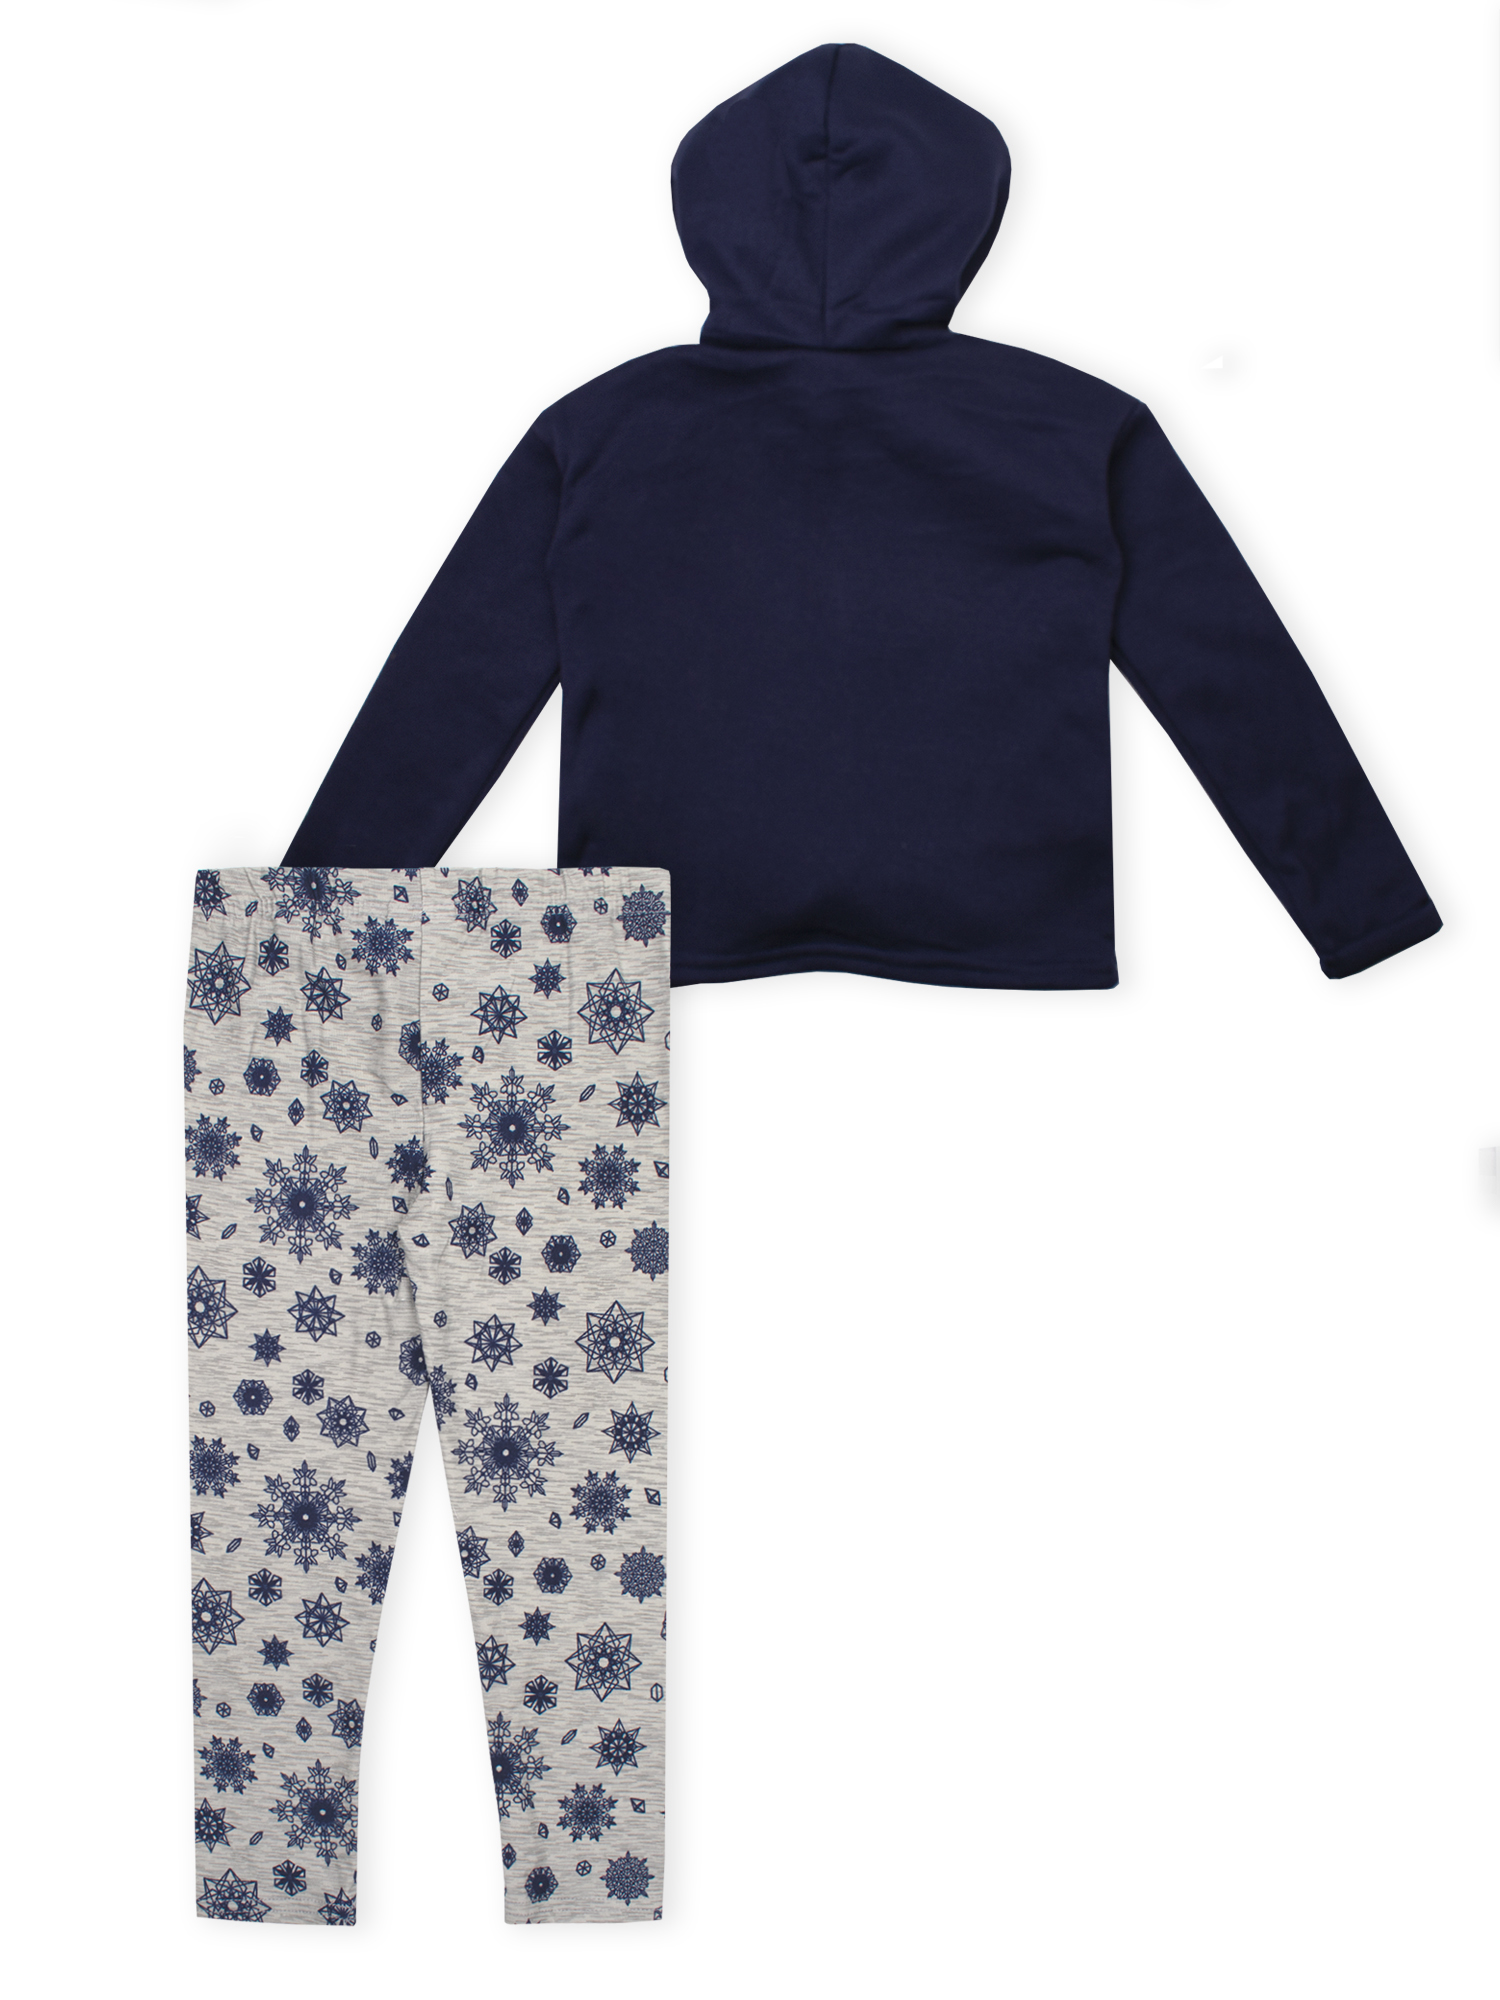 Disney Frozen 2 Anna & Elsa Toddler Girl Tie-Front Hoodie & Printed Leggings, 2pc Outfit Set - image 2 of 3